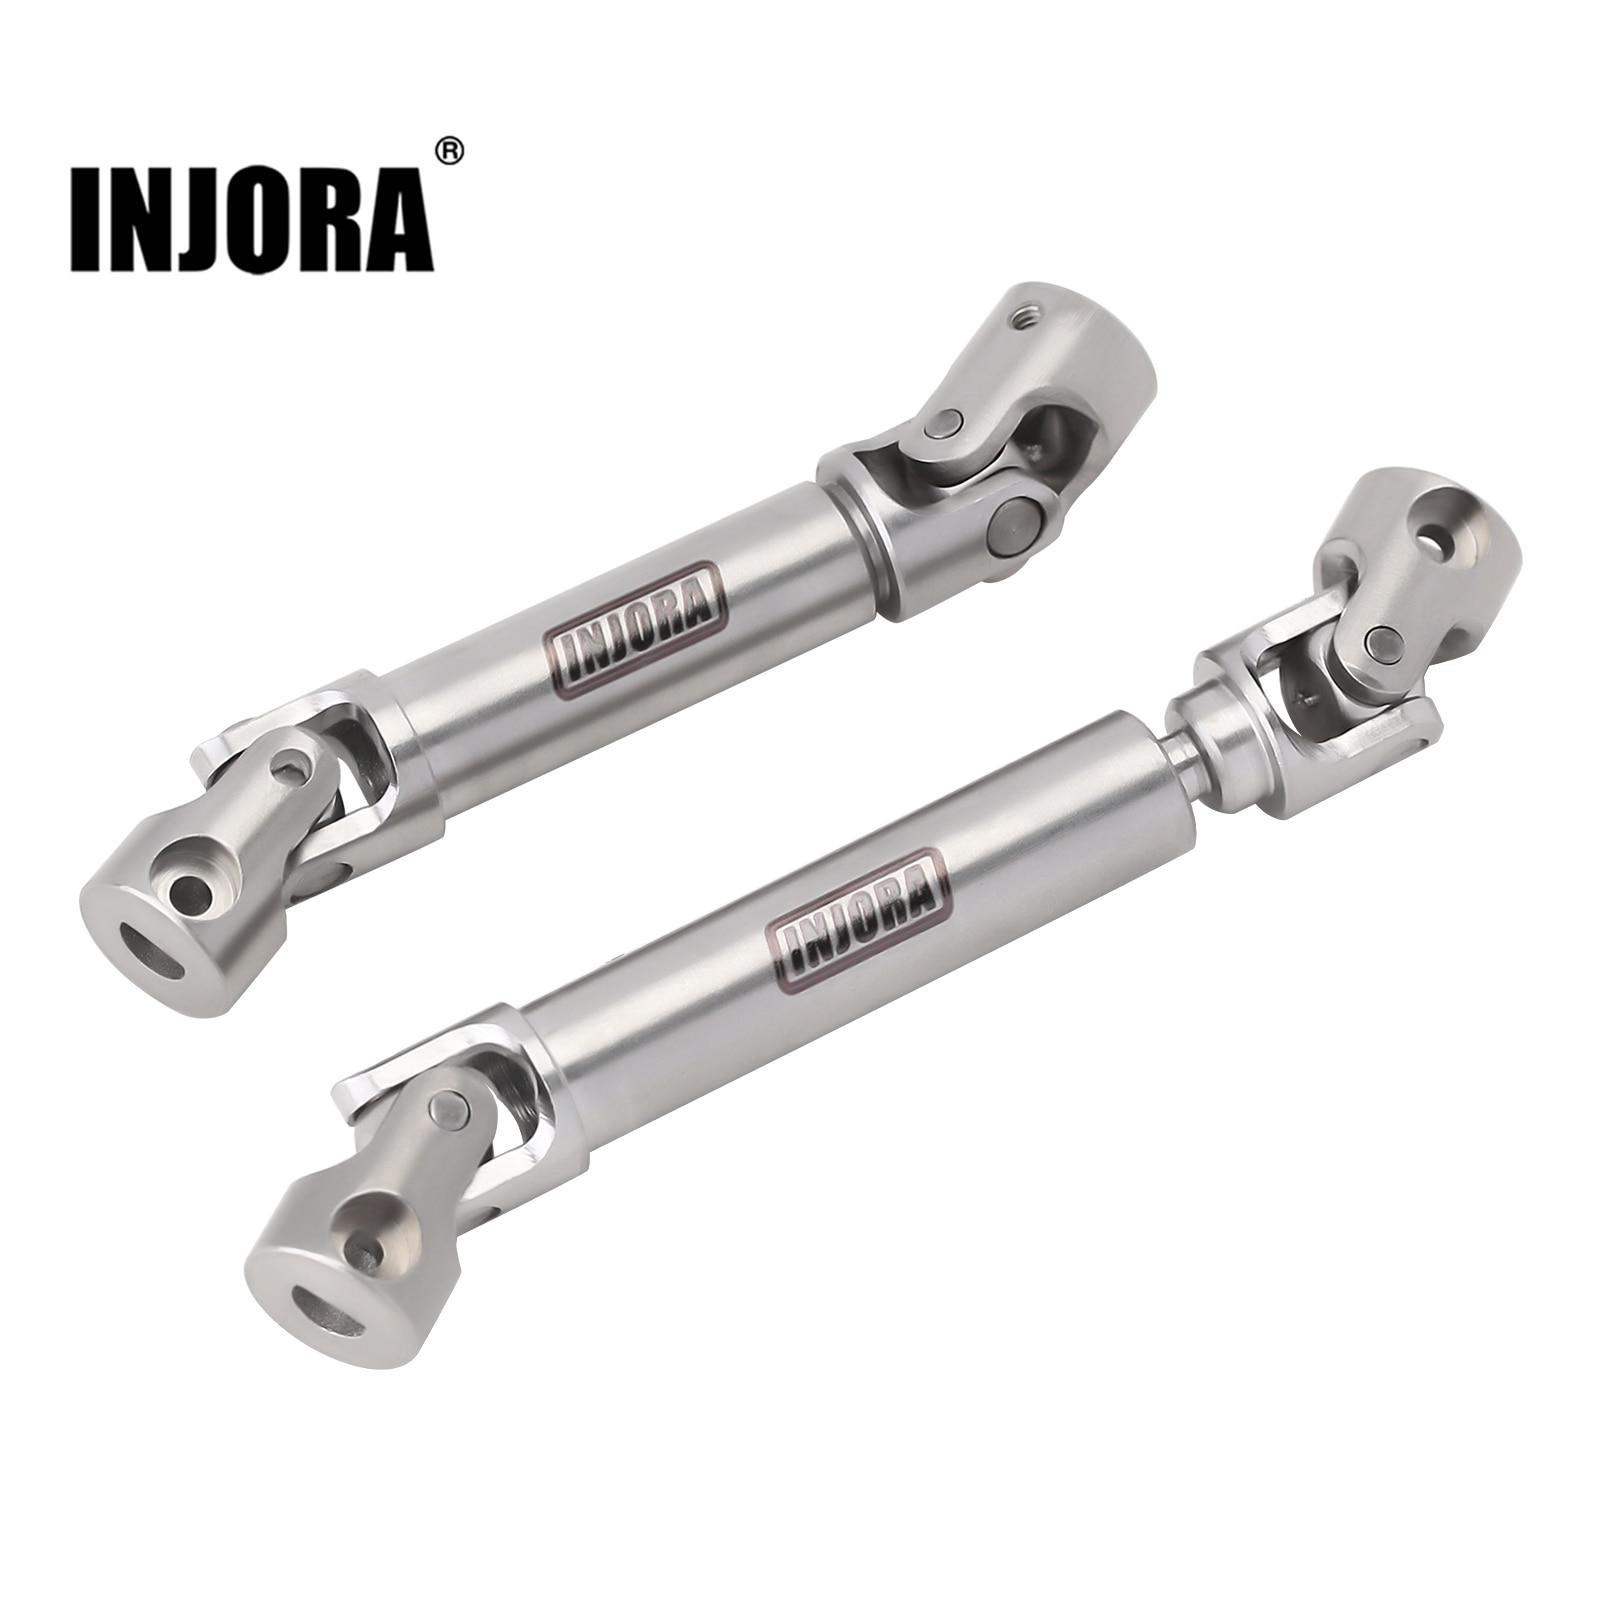 INJORA-Stainless-Steel-Center-Drive-Shaft-D-Shaped-Hole-For-1-24-RC-Crawler-Axial-AX24.jpg